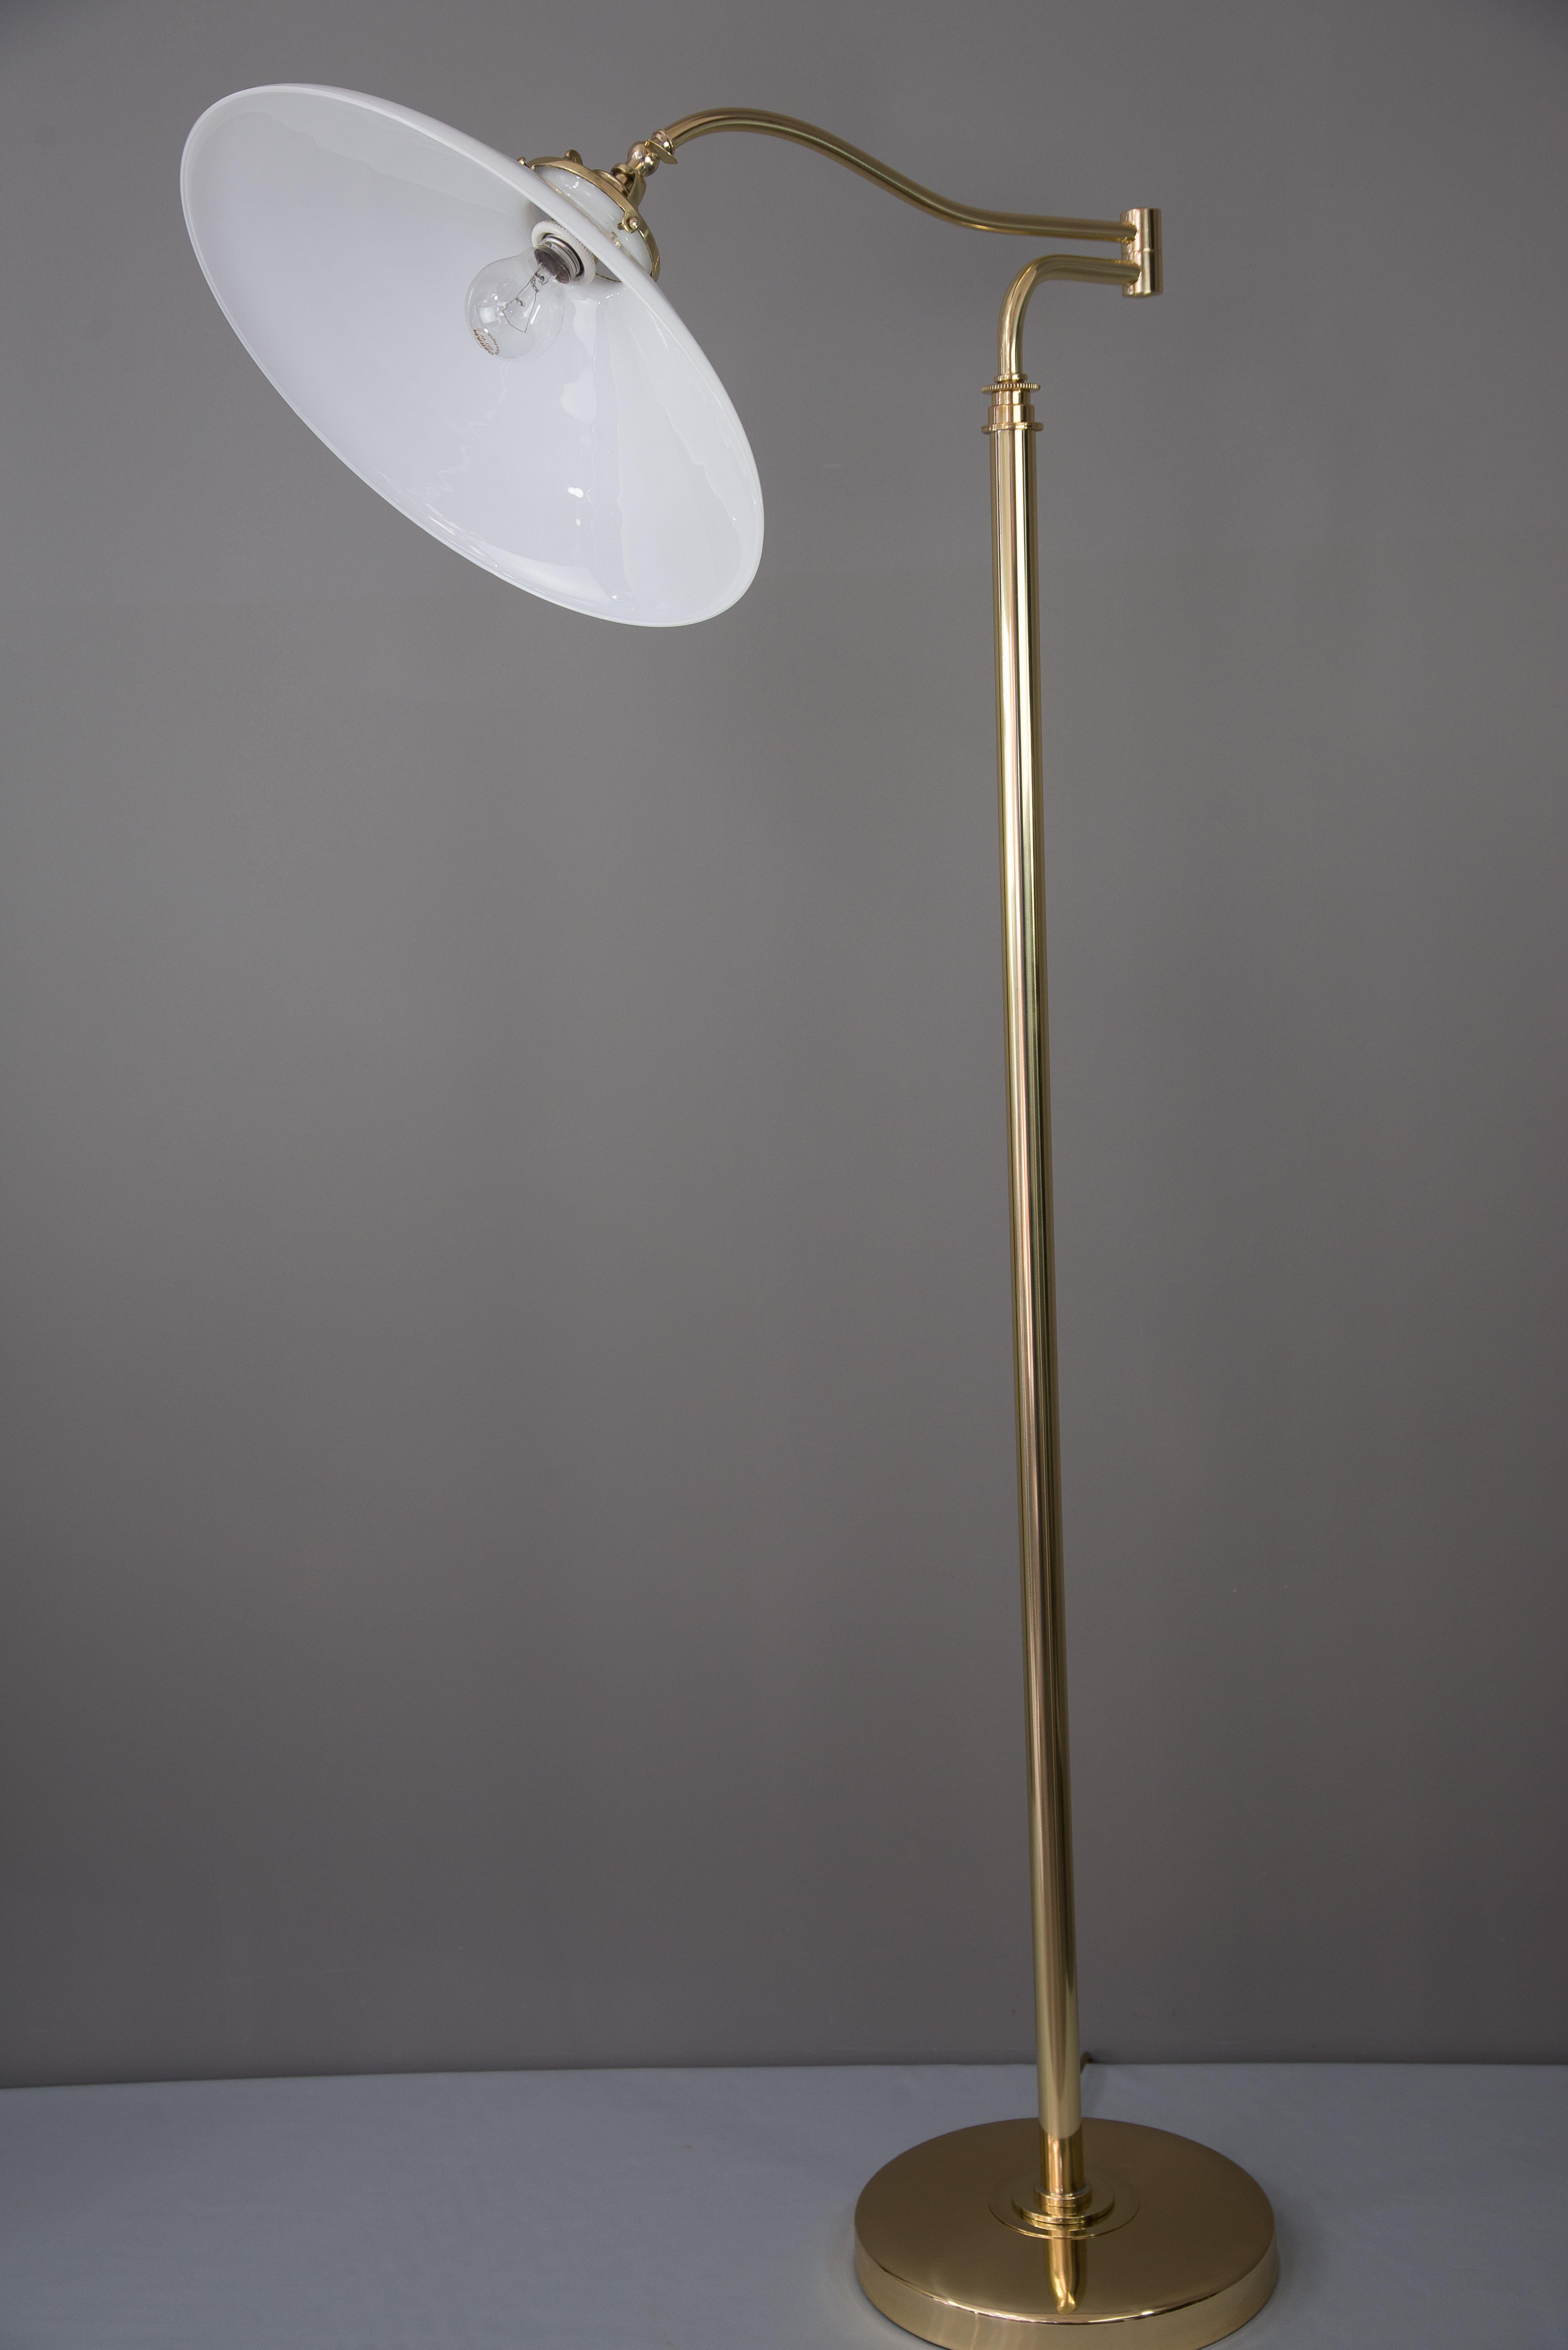 Extendable and swiveling Art Deco floorlamp, circa 1920s
Brass polished and stove enameled
Measure: High is from 142cm-172cm.
 